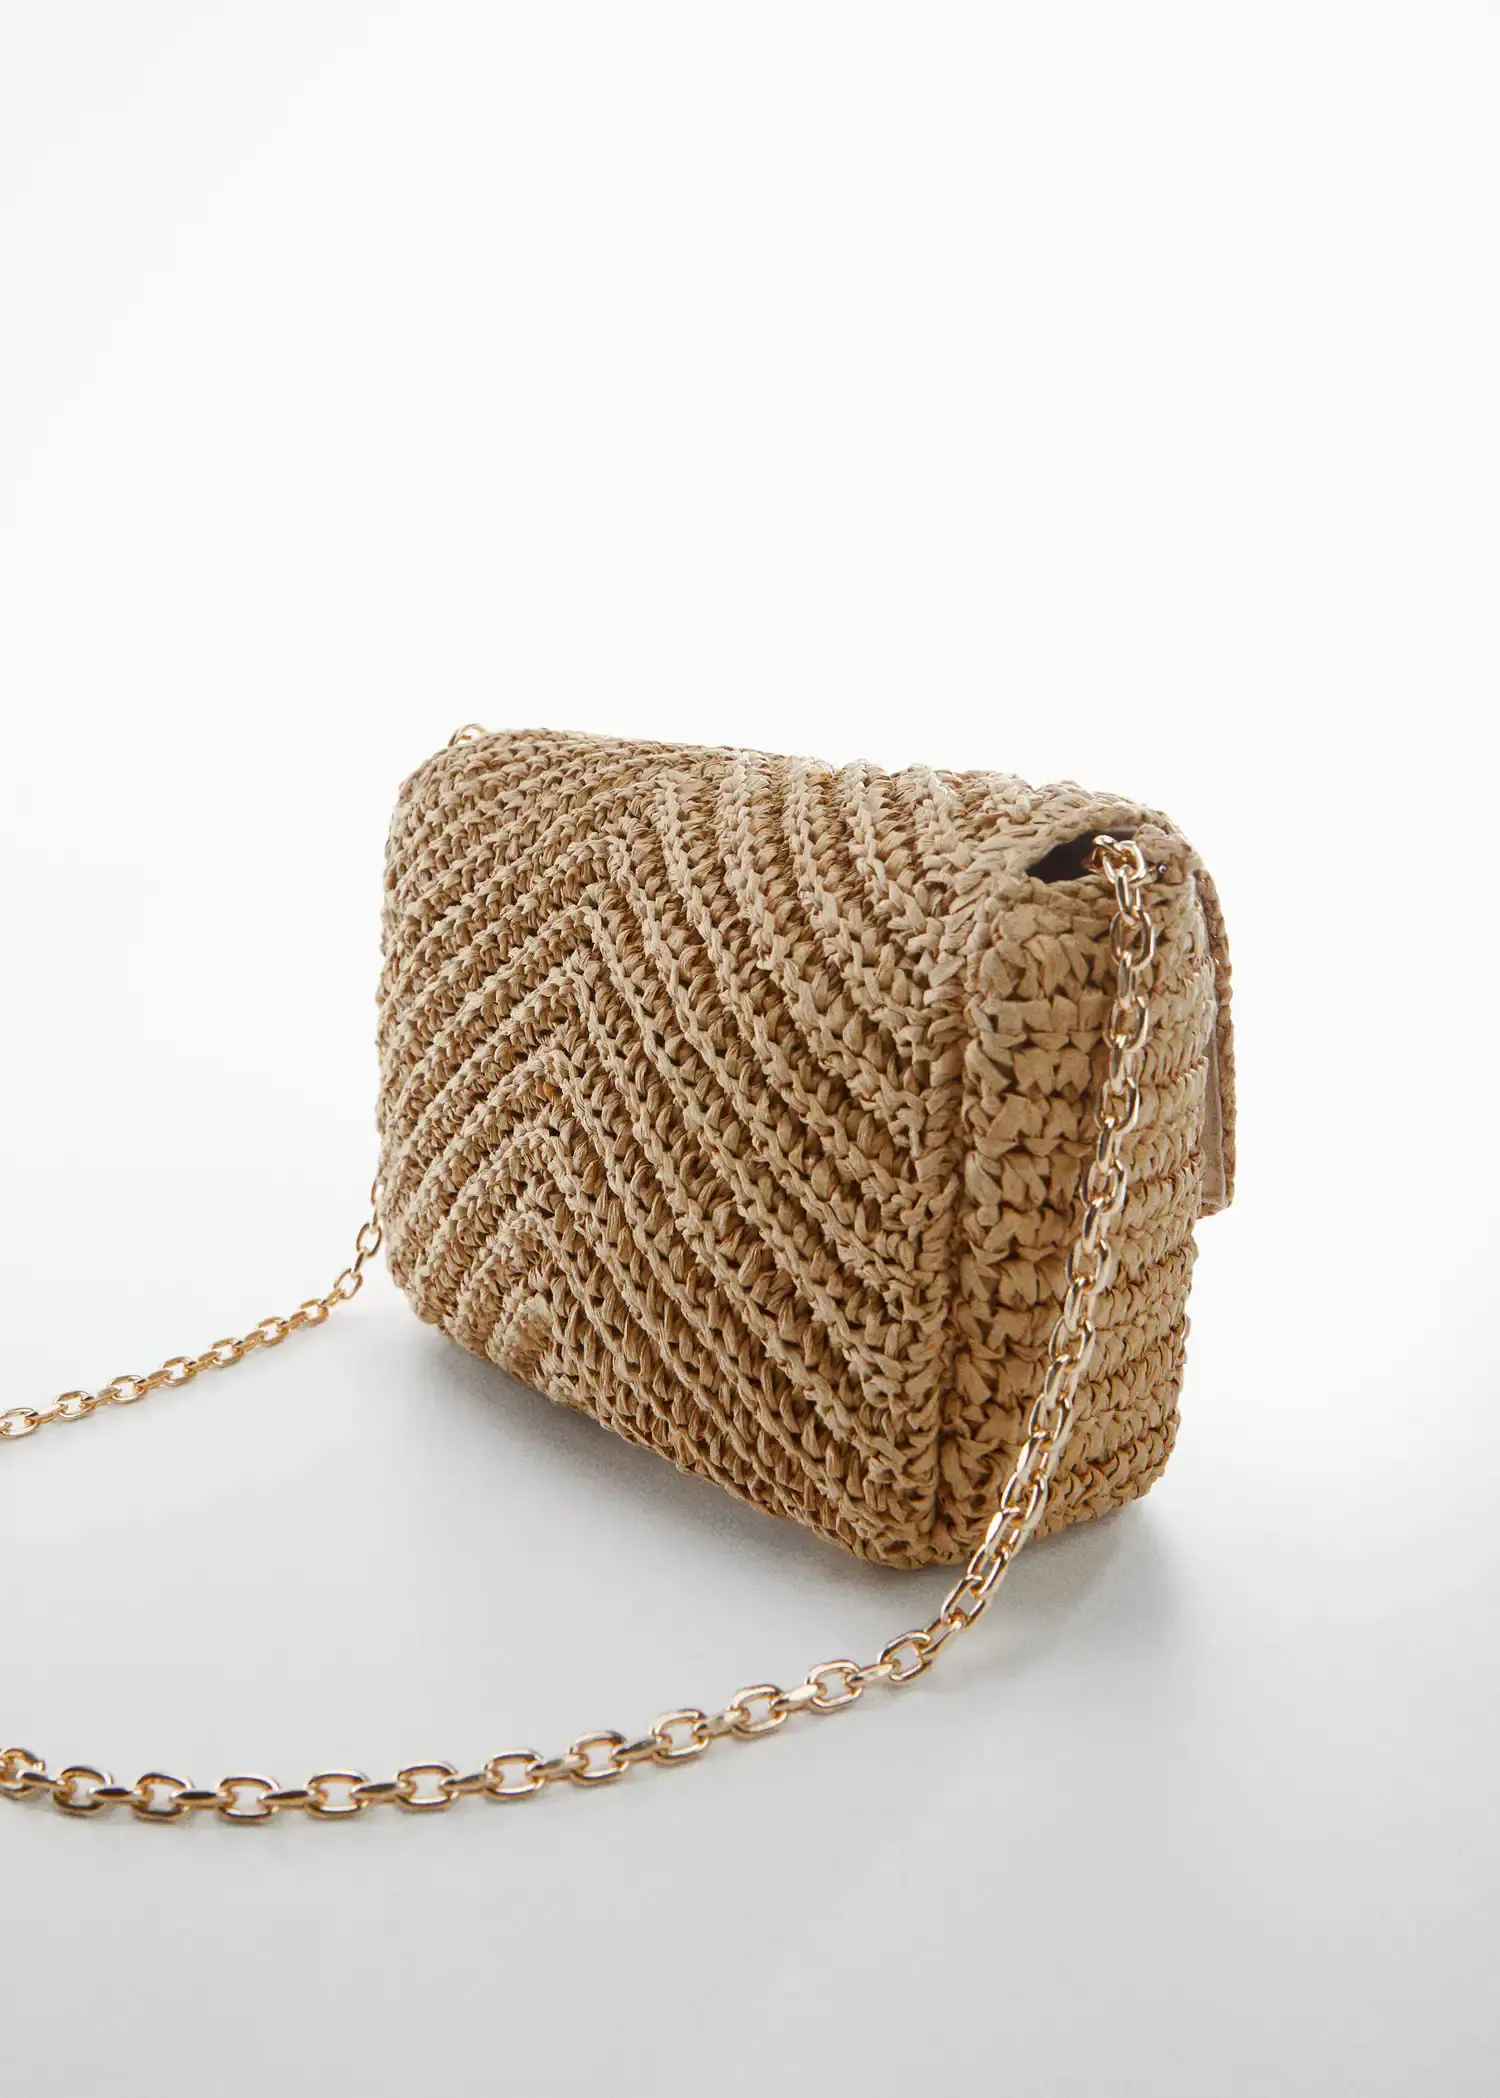 Mango Natural fiber bag with flap. a close-up of a straw purse on a white surface. 